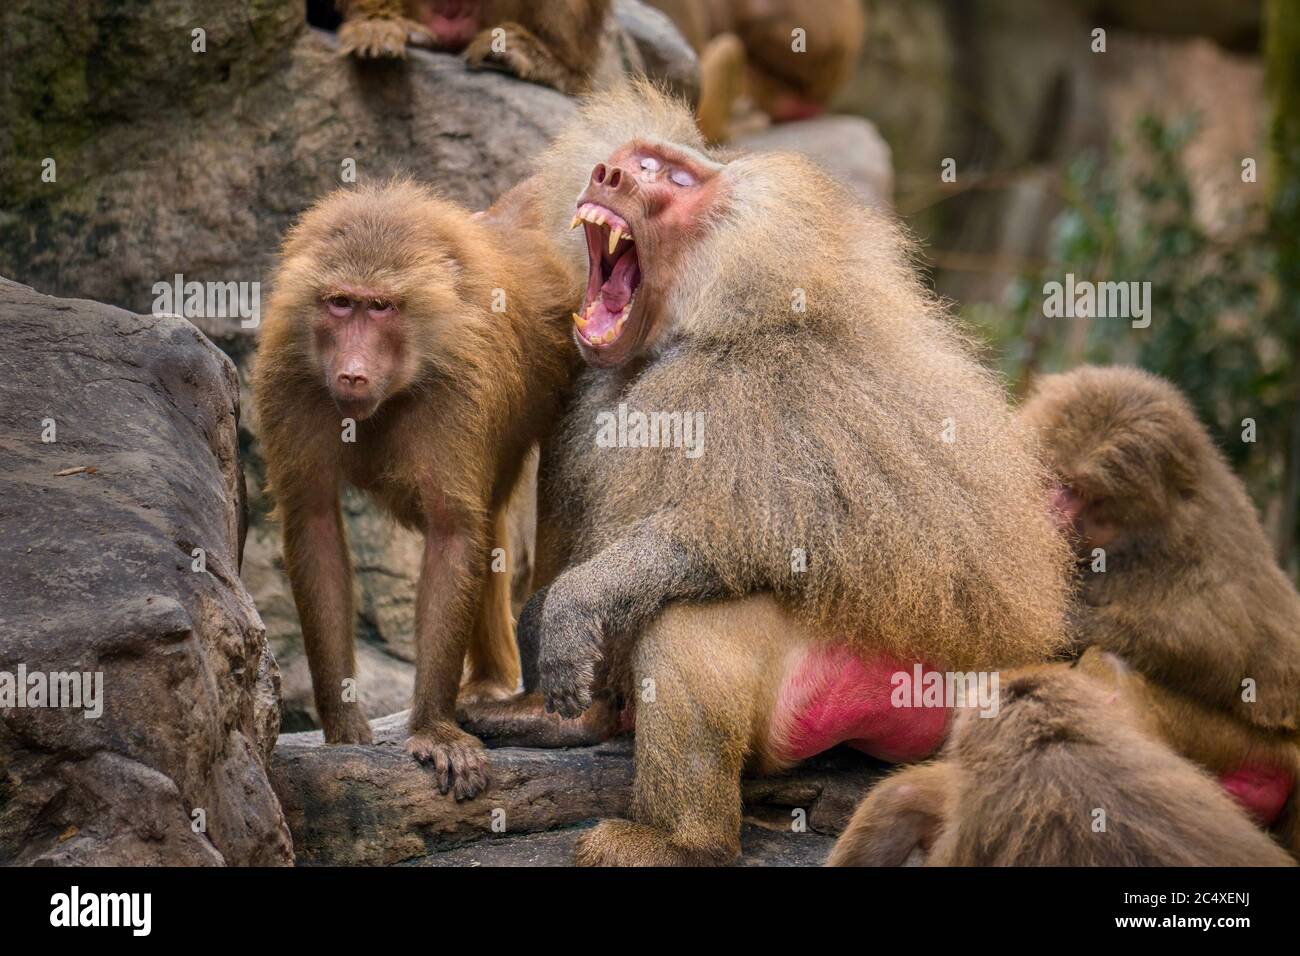 A male baboon (Papio hamadryas) displays long canine teeth, which are a sign of his fitness, fighting ability, social rank, and mating superiority. Stock Photo